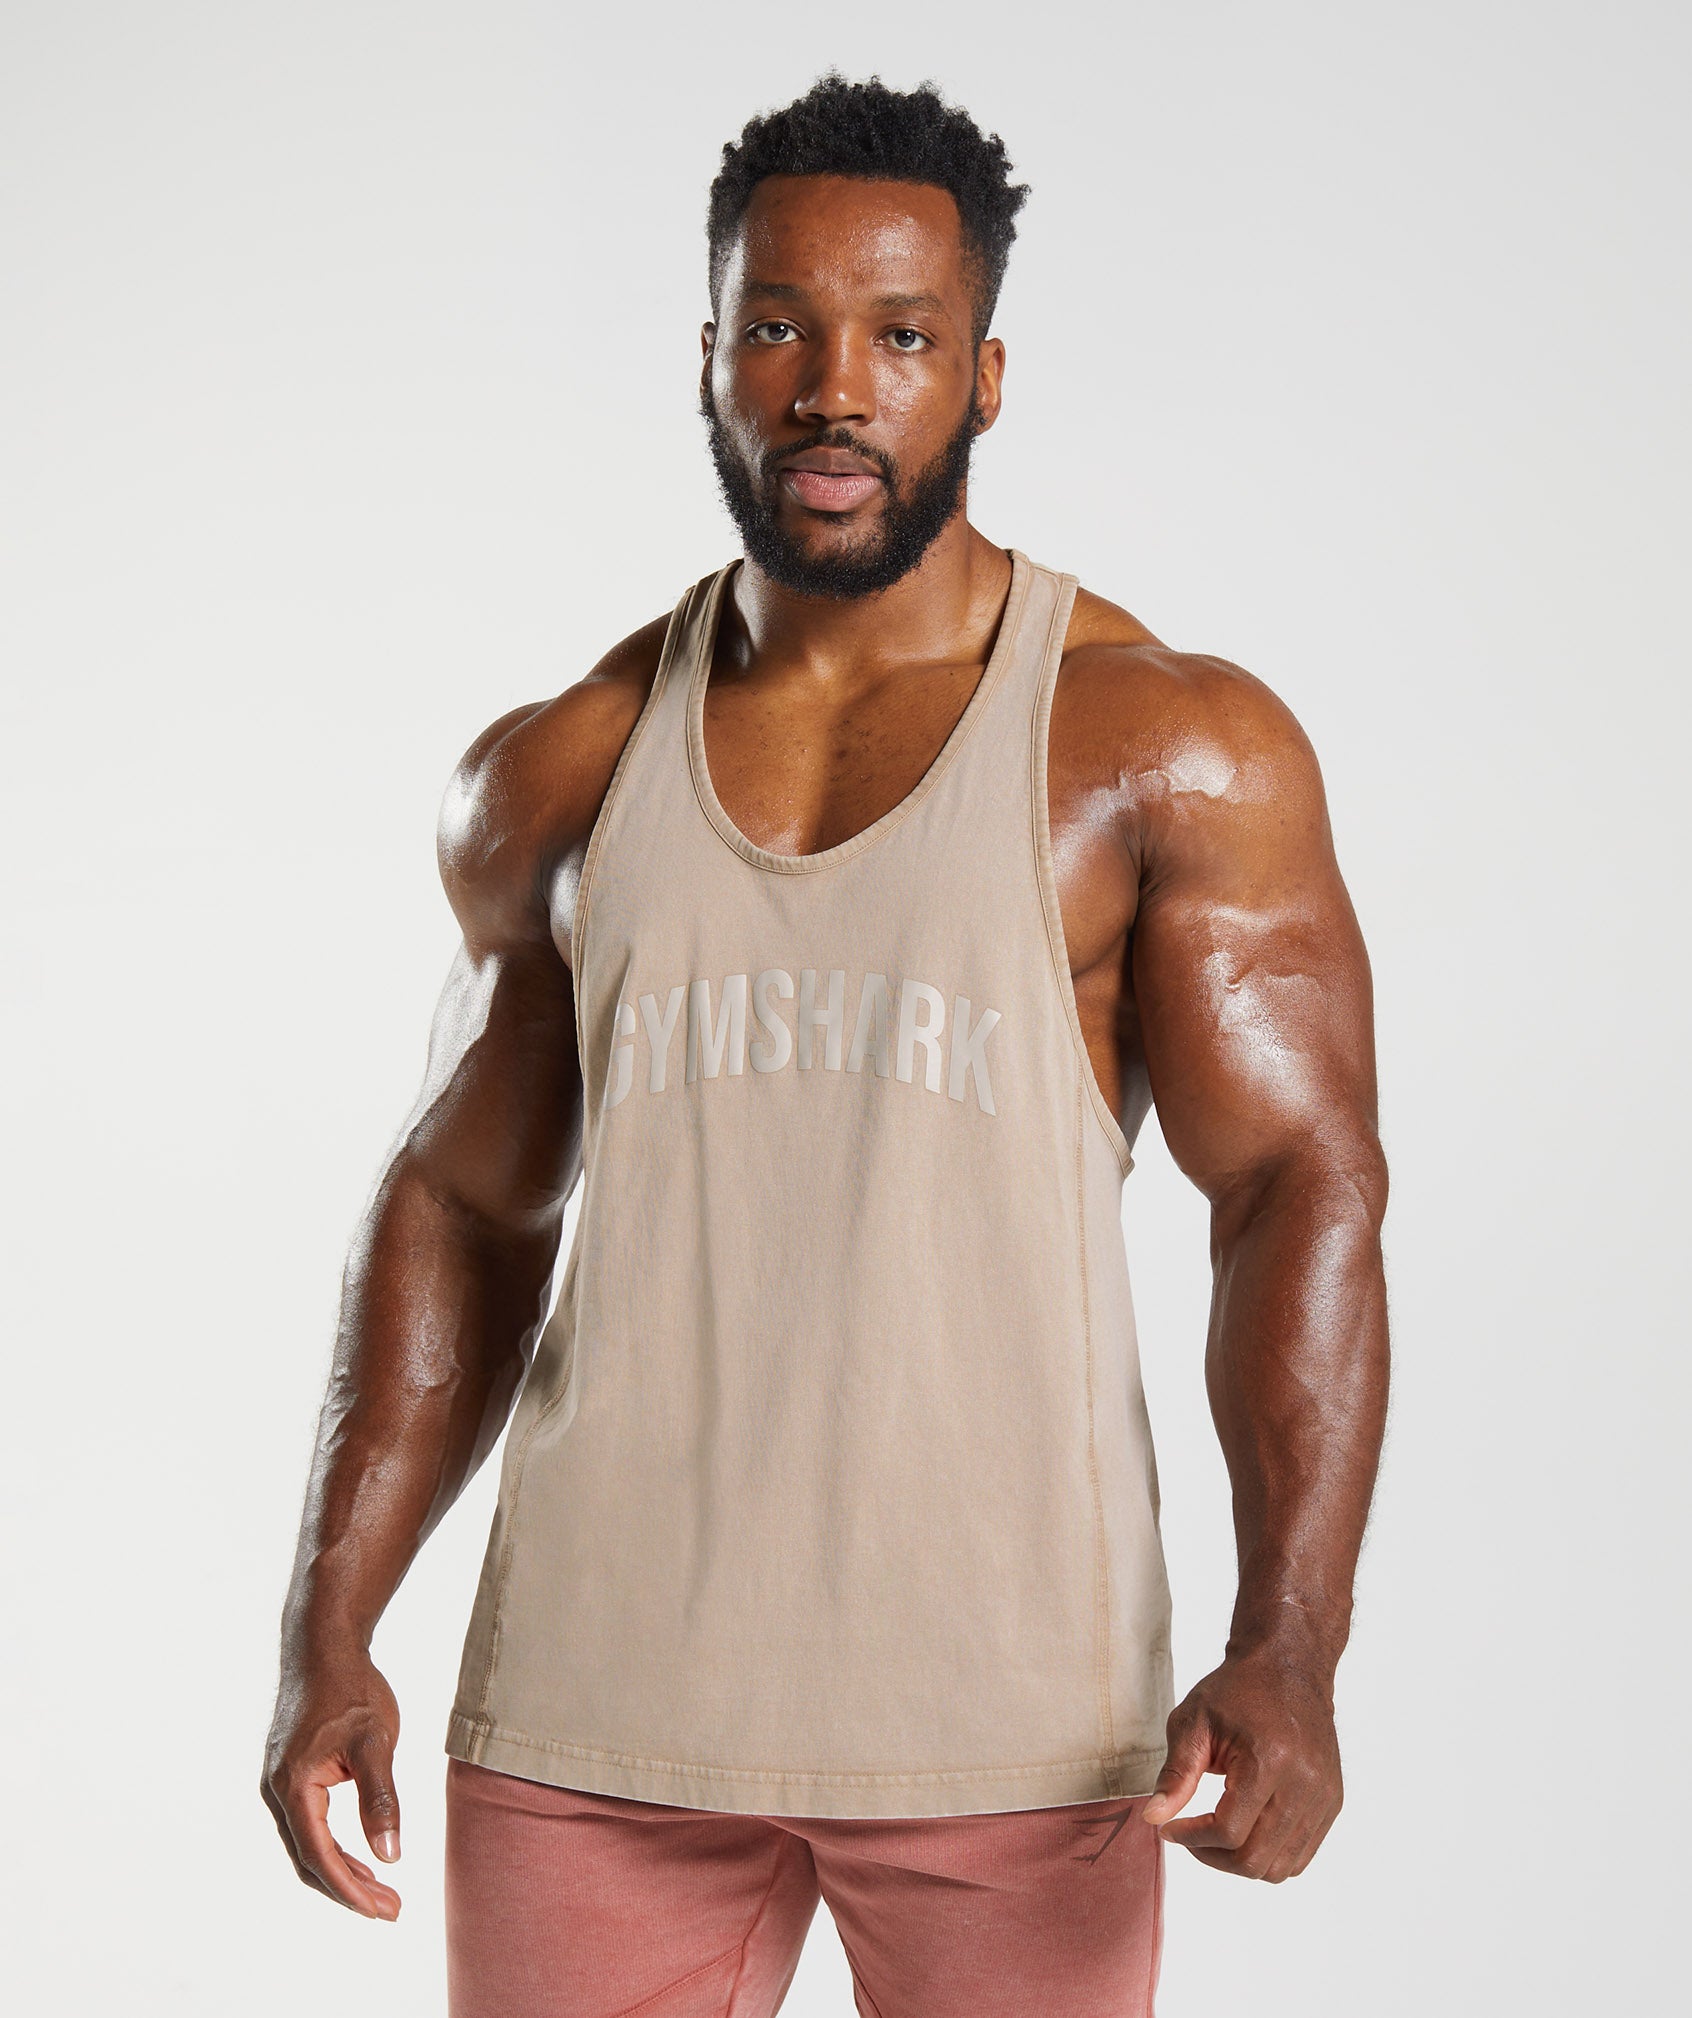 Gymshark Power Washed T-Shirt - Cement Brown